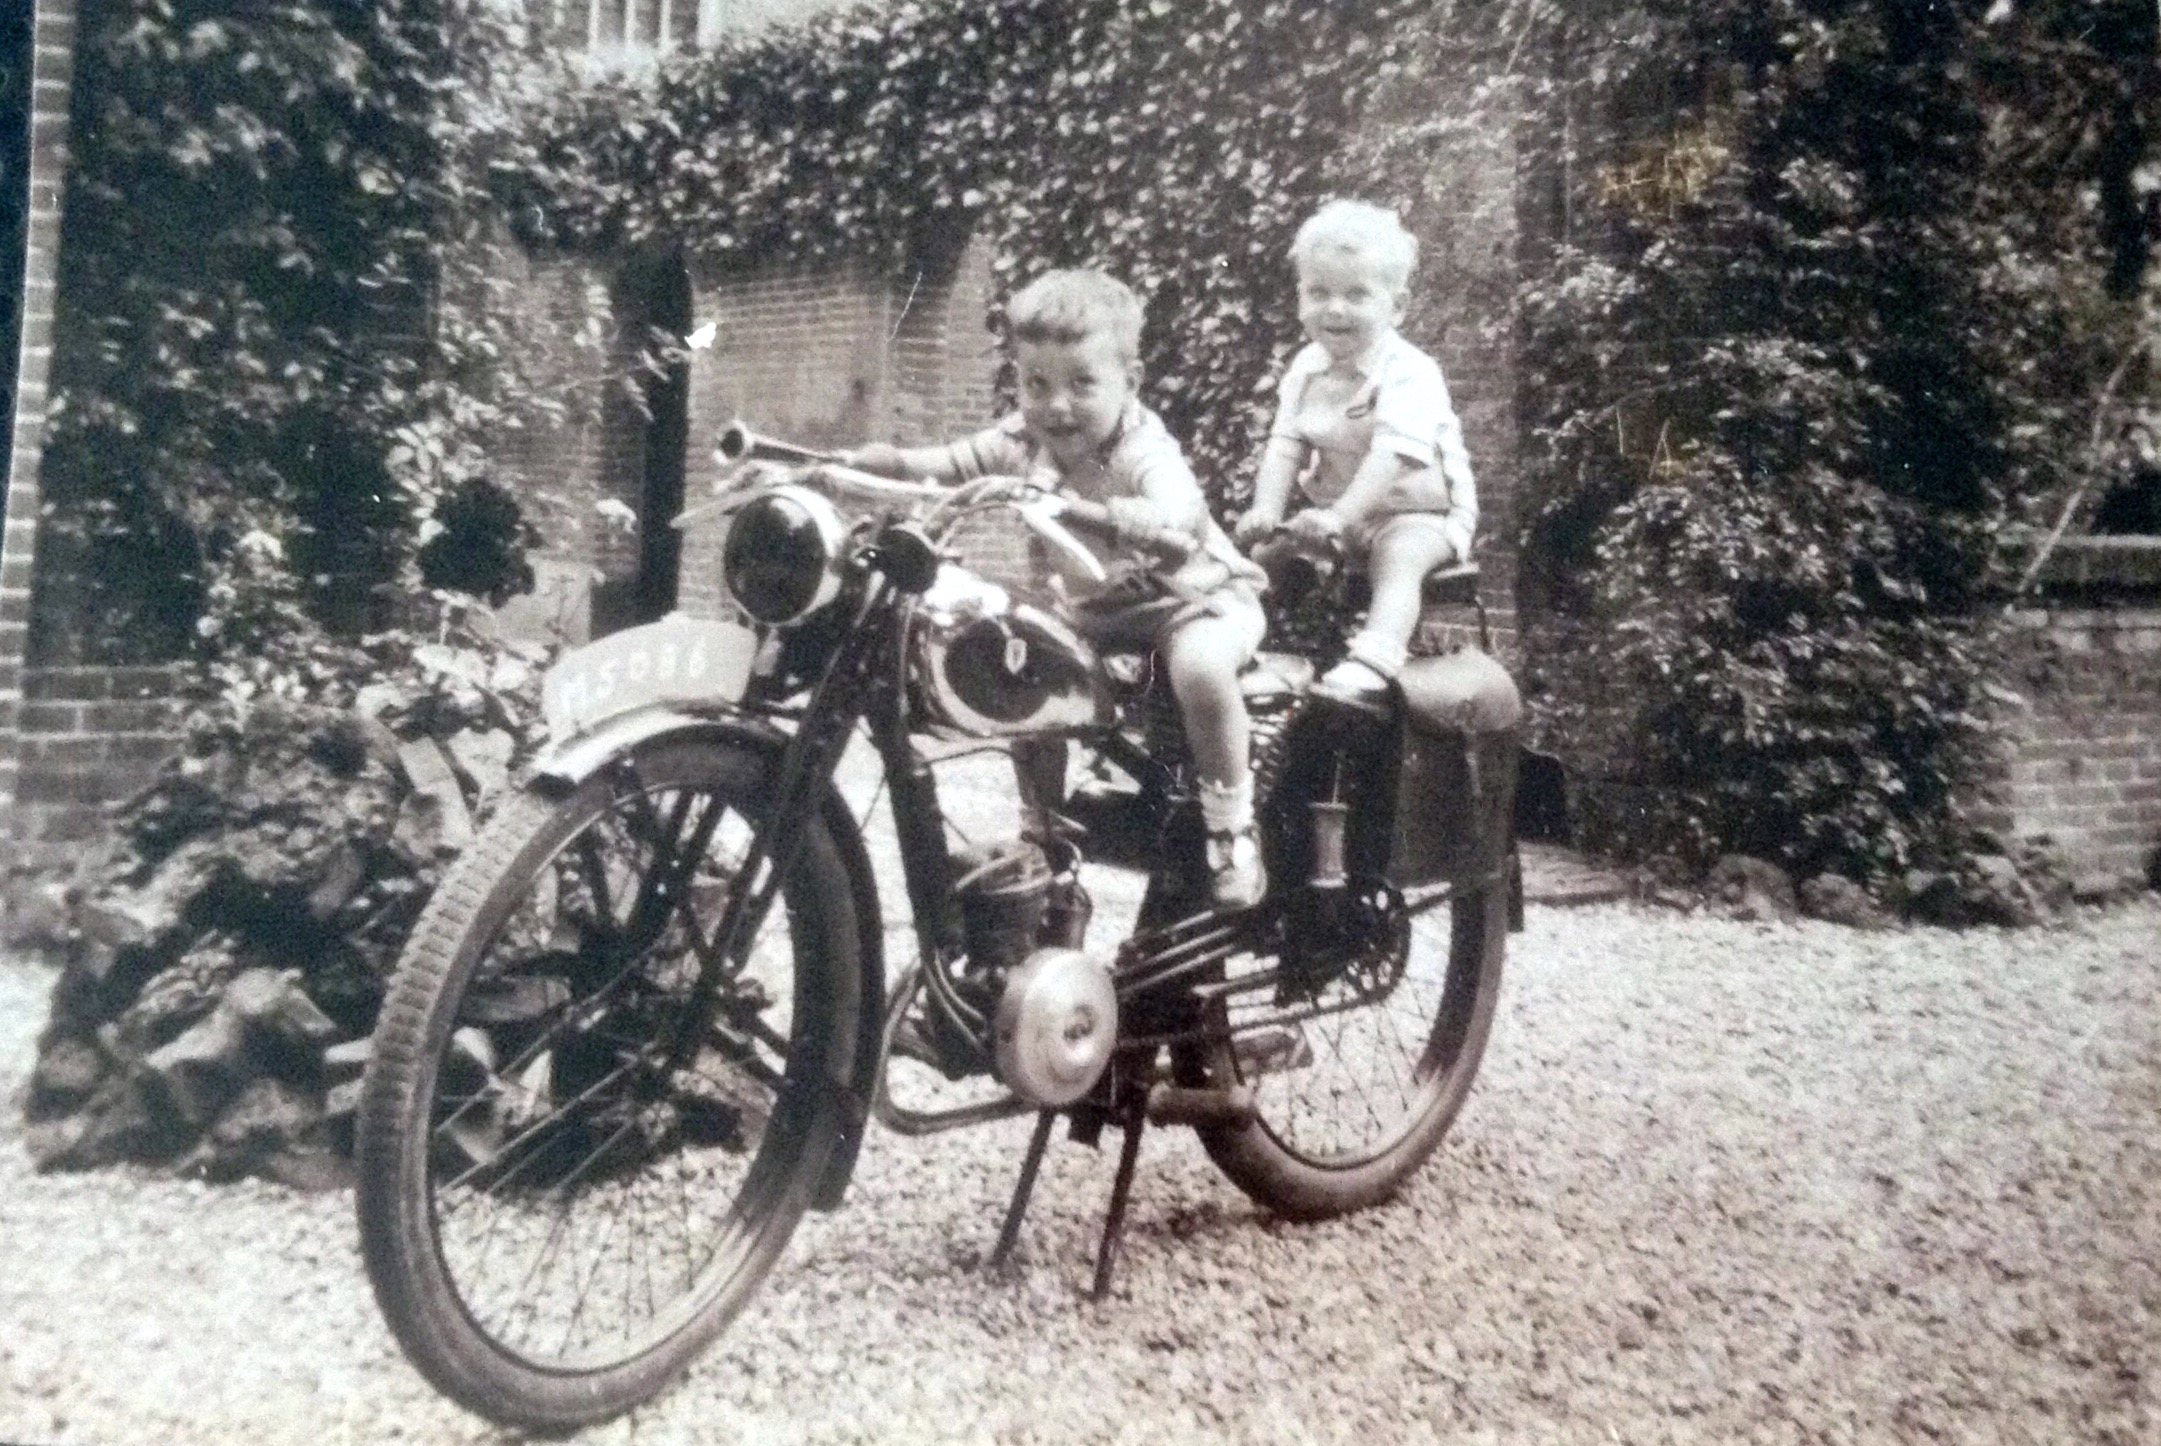 Me and my big brother on dad's motorbike in 1943, Netherlands